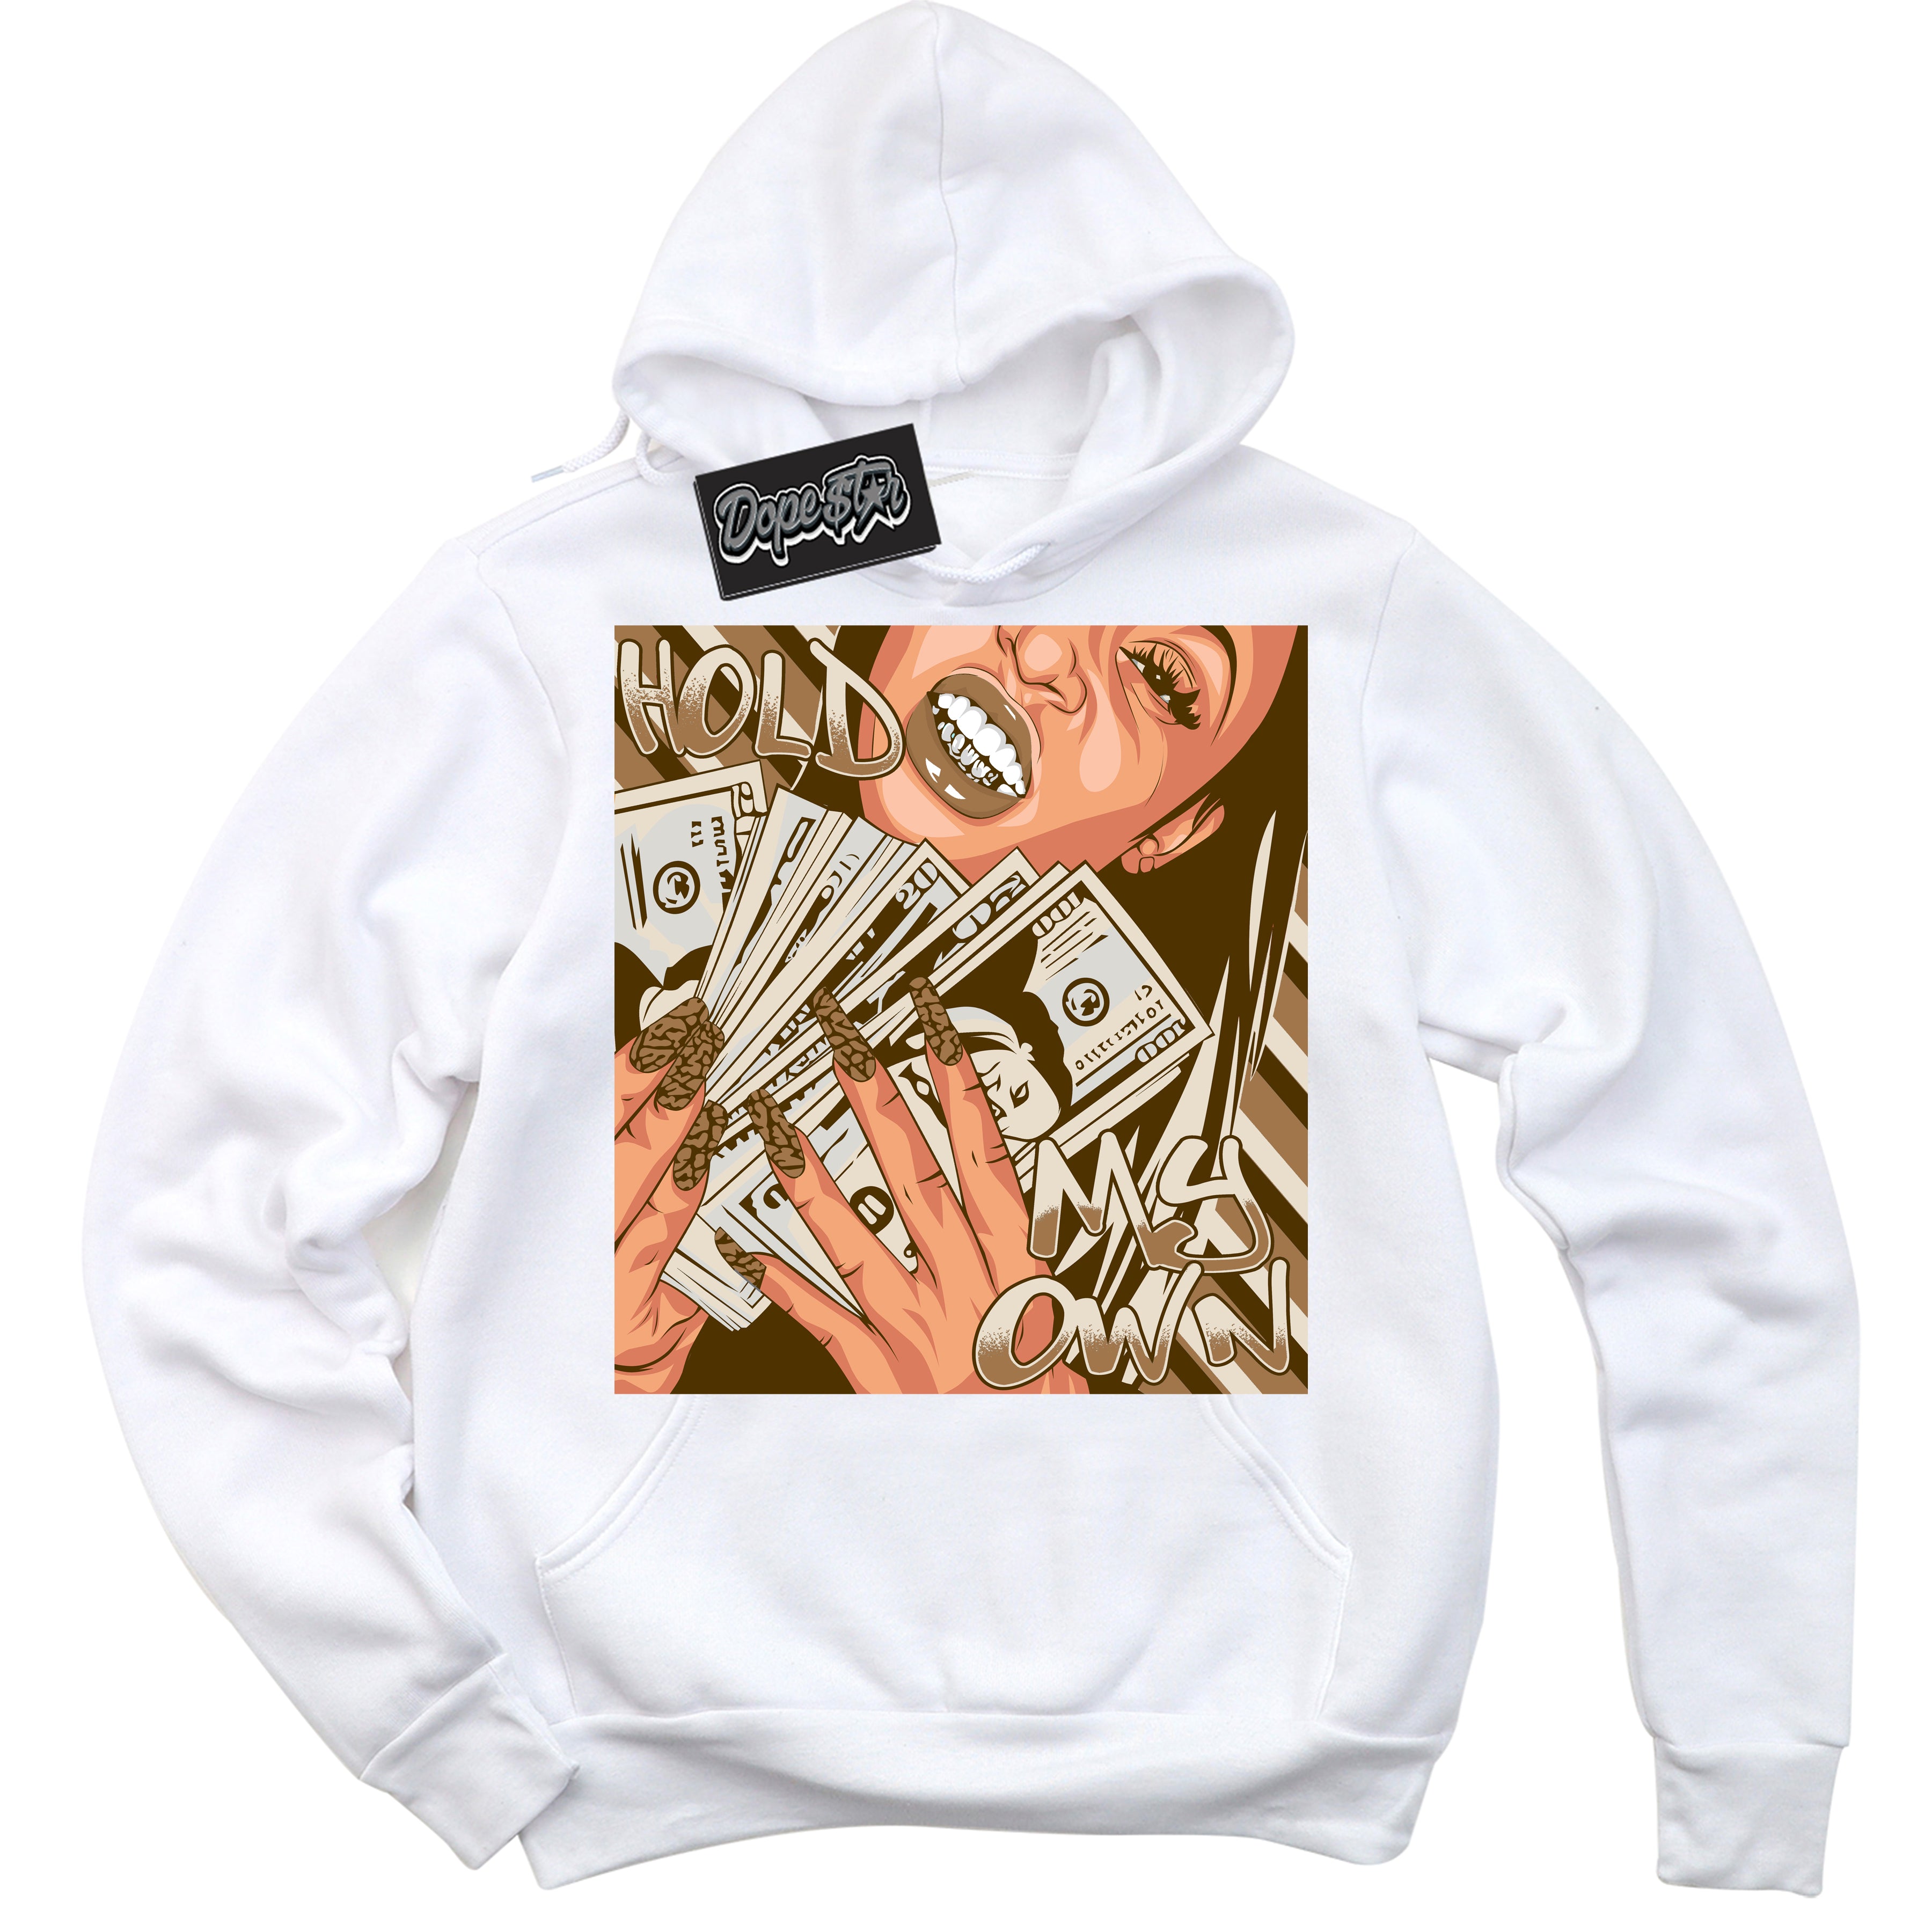 Cool White Graphic DopeStar Hoodie with “ Hold My Own “ print, that perfectly matches Palomino 3s sneakers